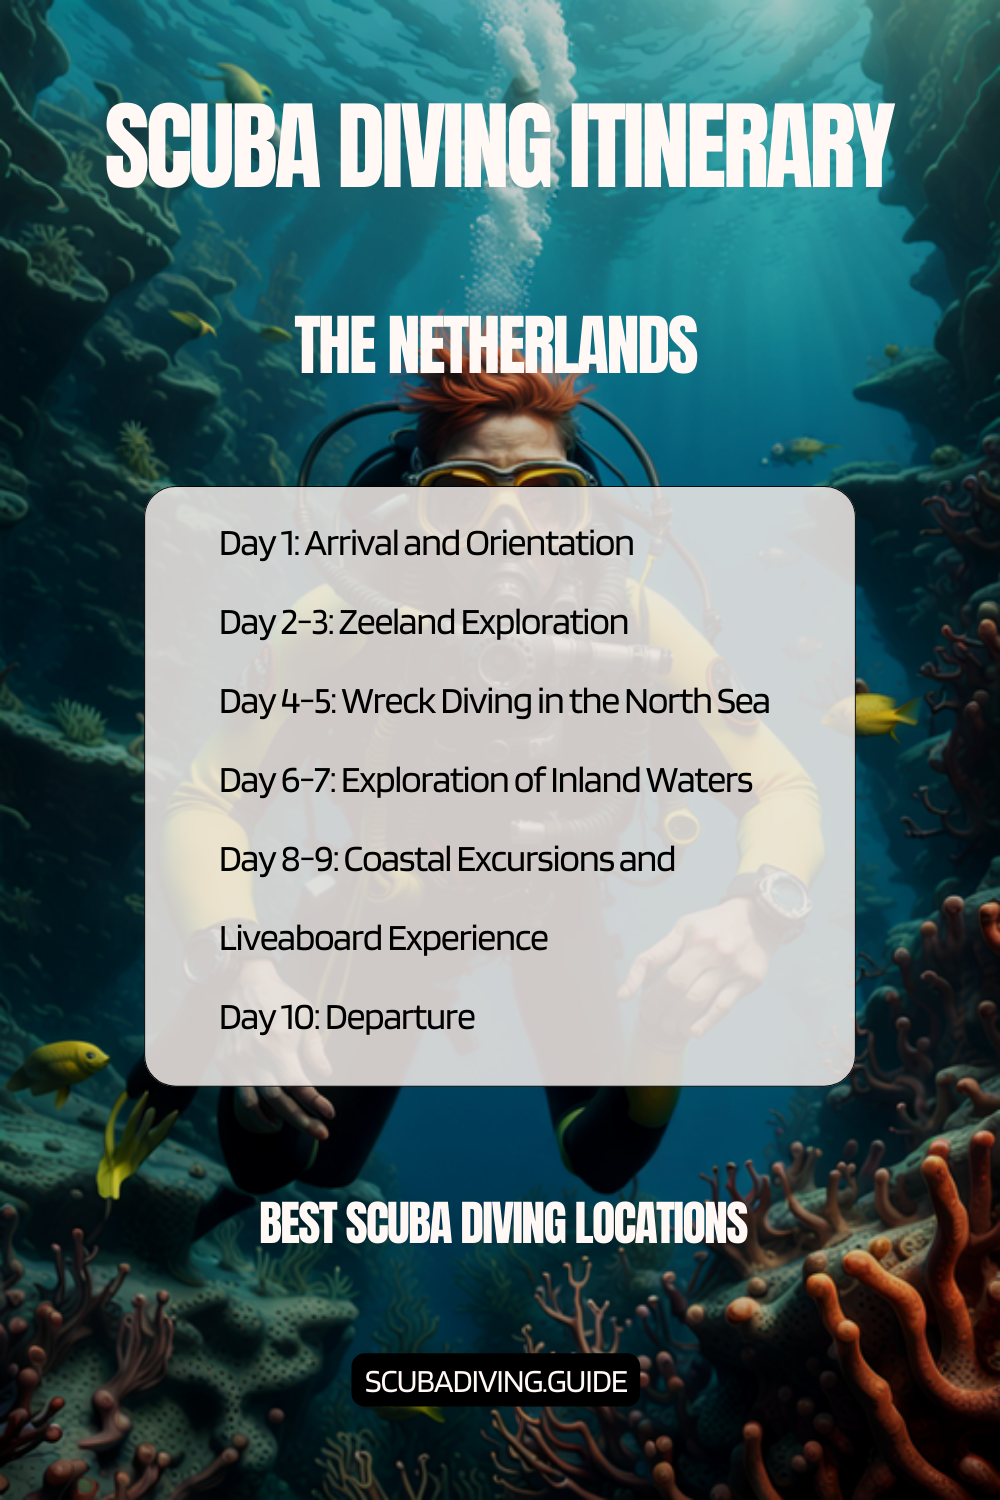 The Netherlands Recommended Scuba Diving Itinerary